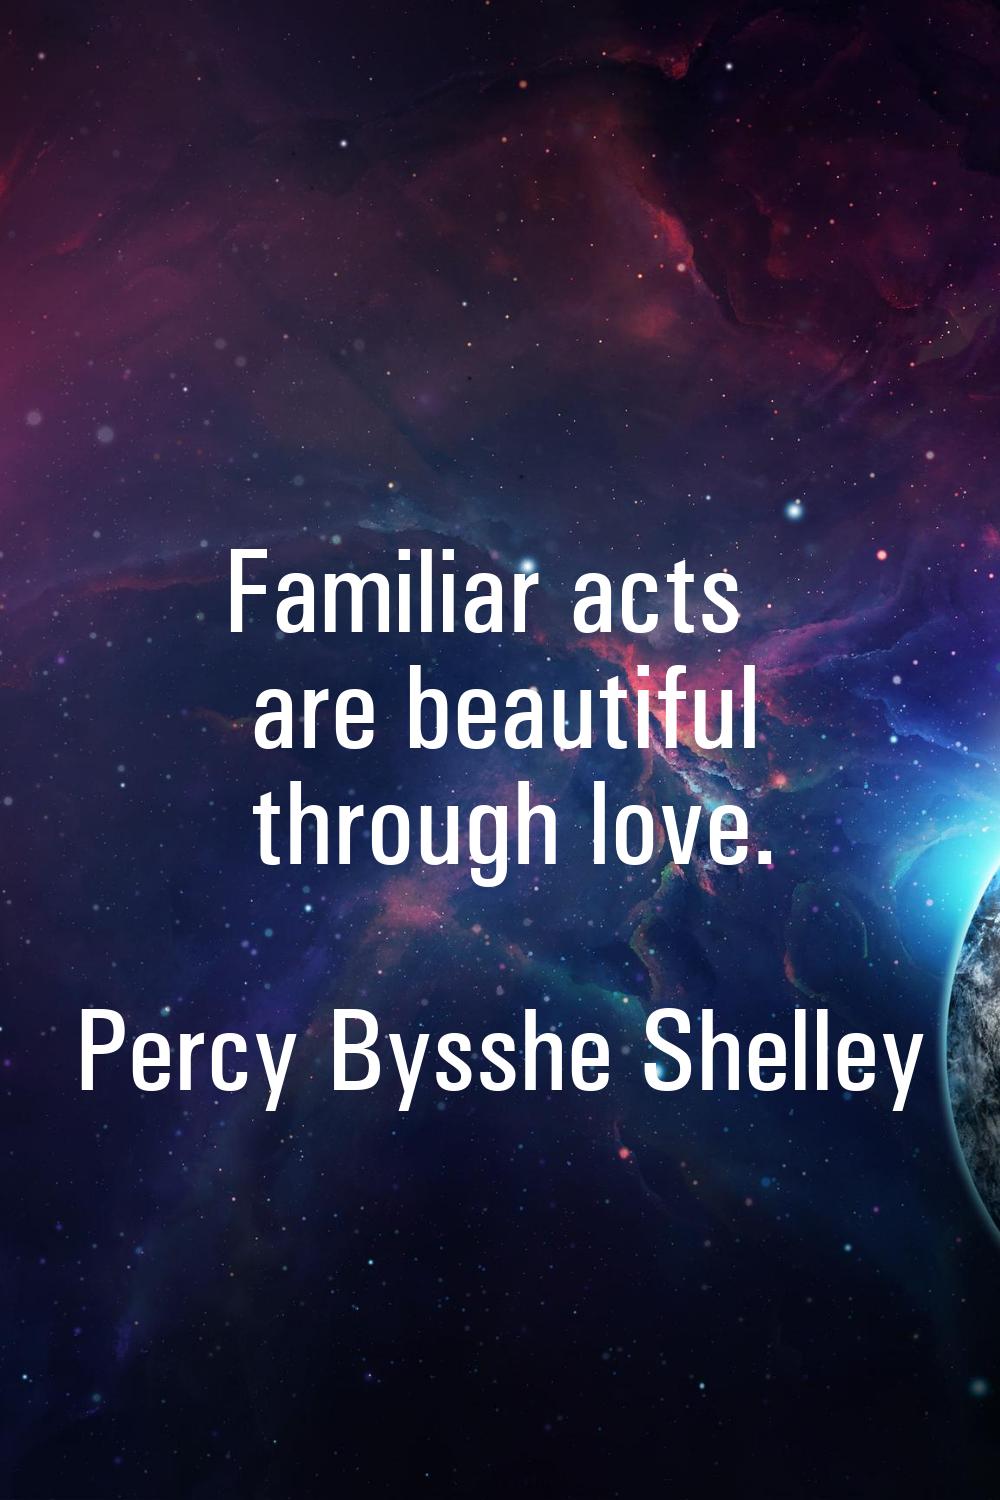 Familiar acts are beautiful through love.